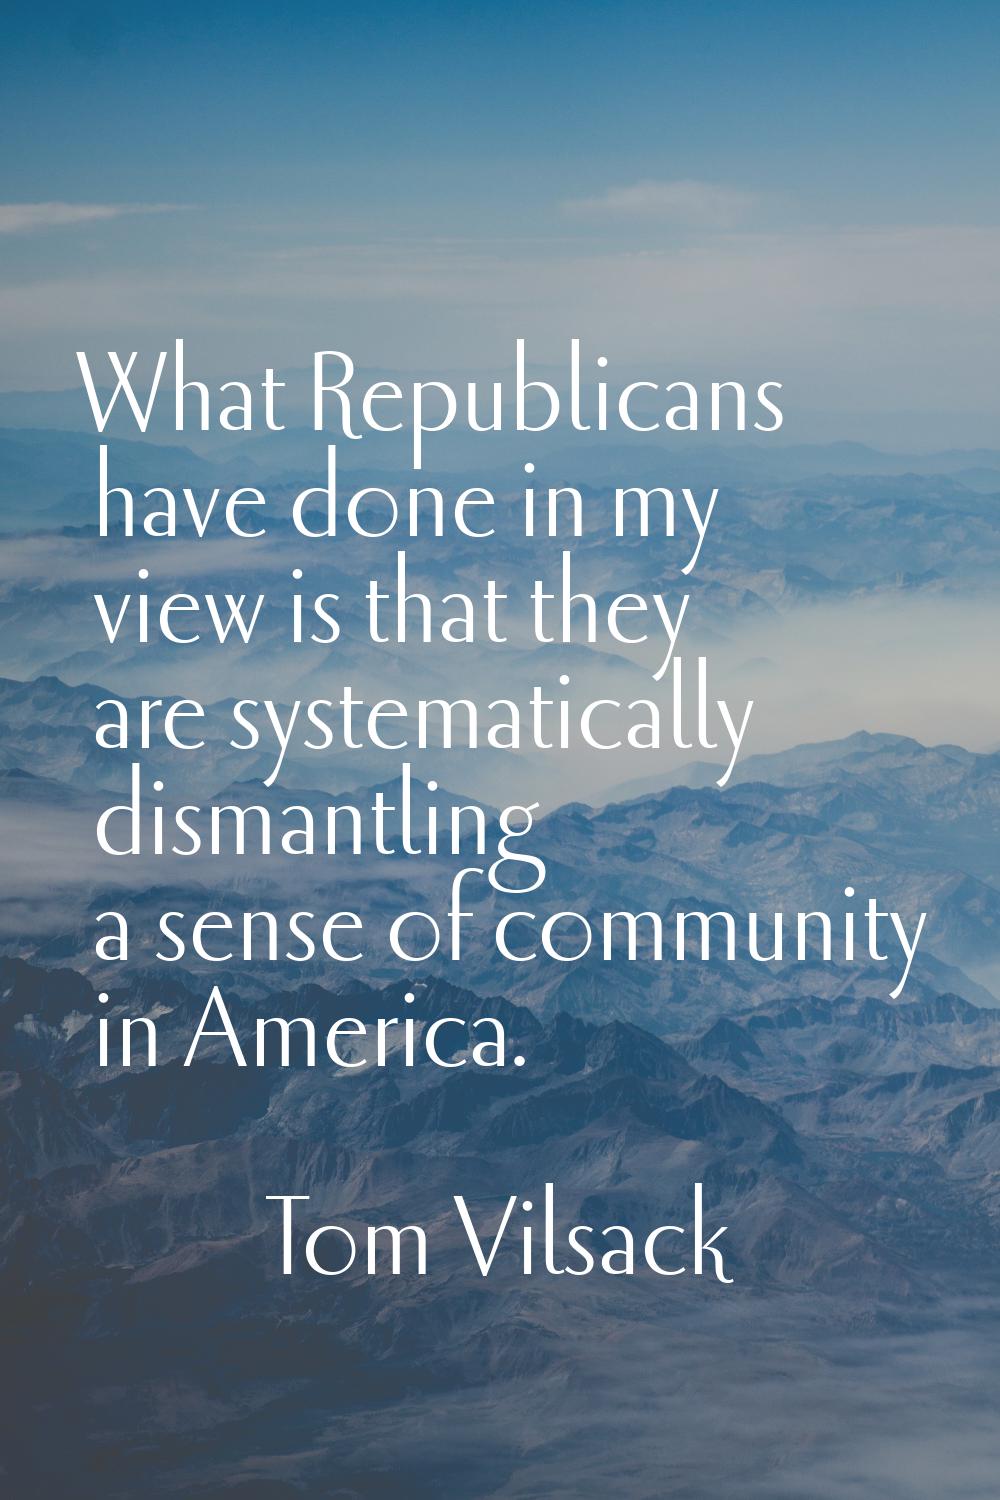 What Republicans have done in my view is that they are systematically dismantling a sense of commun